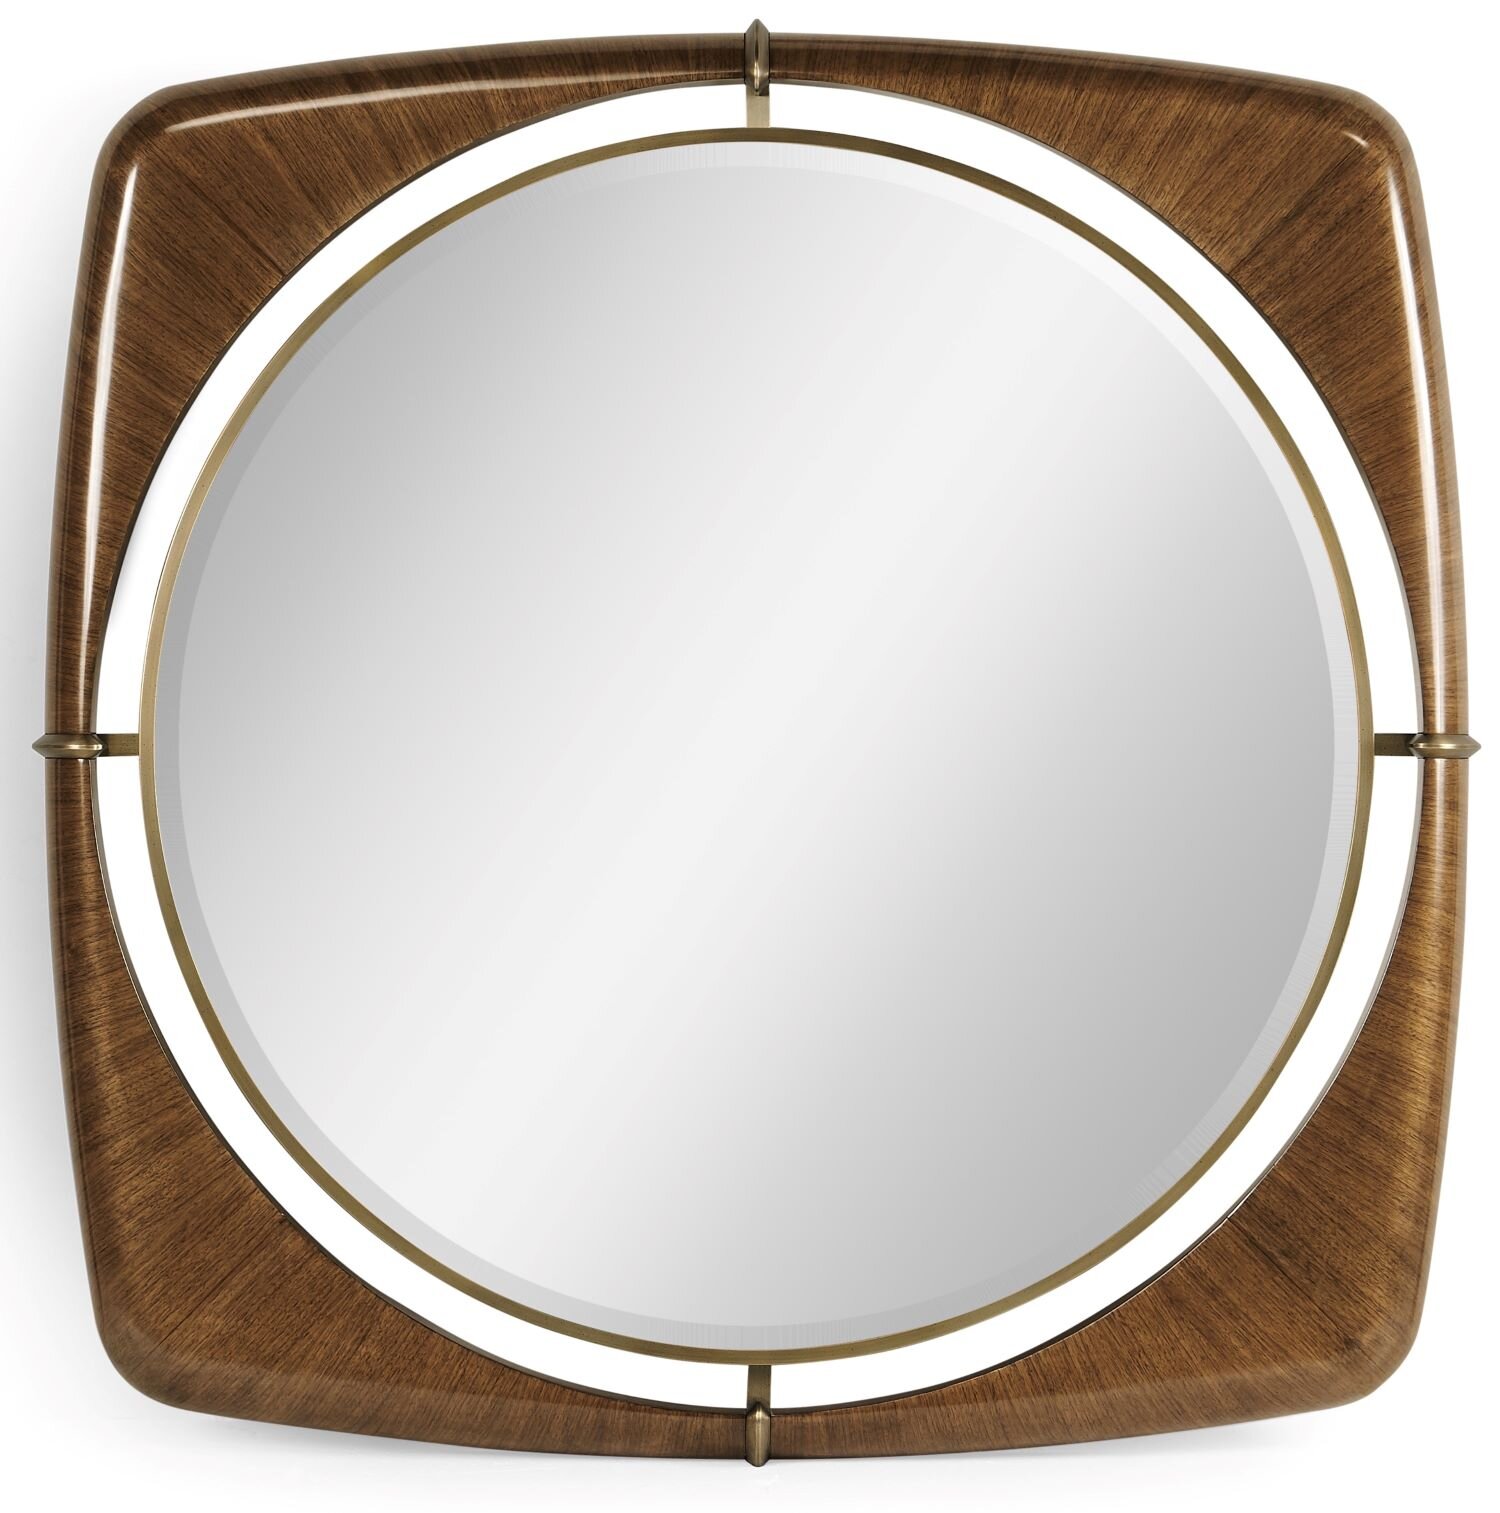 Walnut mirror, The Toulouse Collection, Jonathan Charles. 